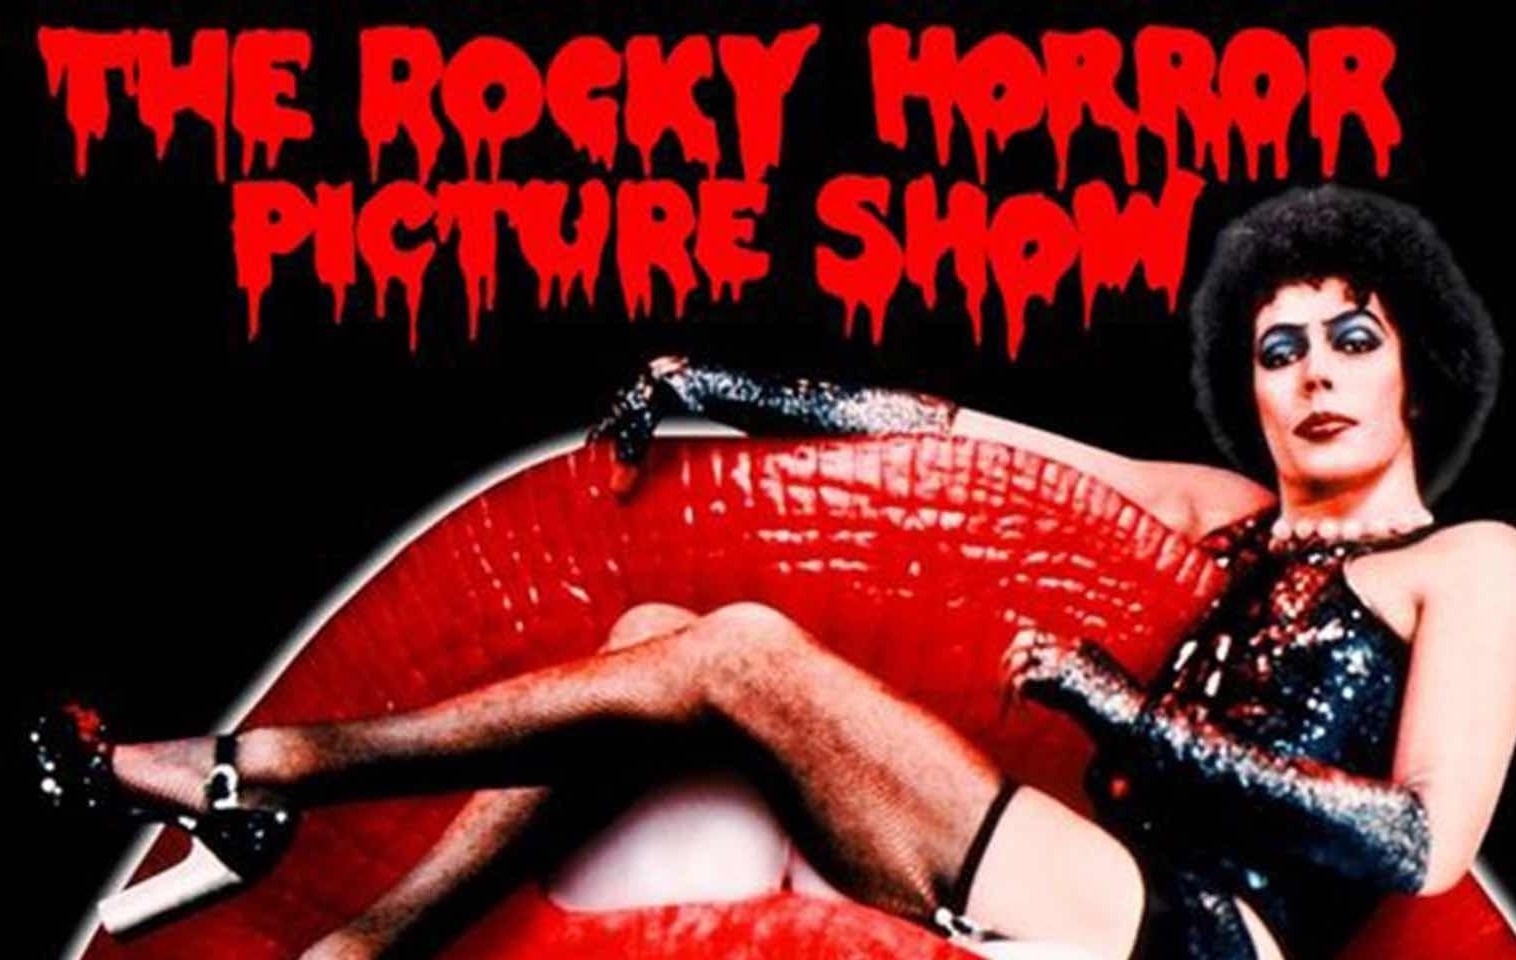 The rocky horror picture show 45th anniversary with special guest barry bos...